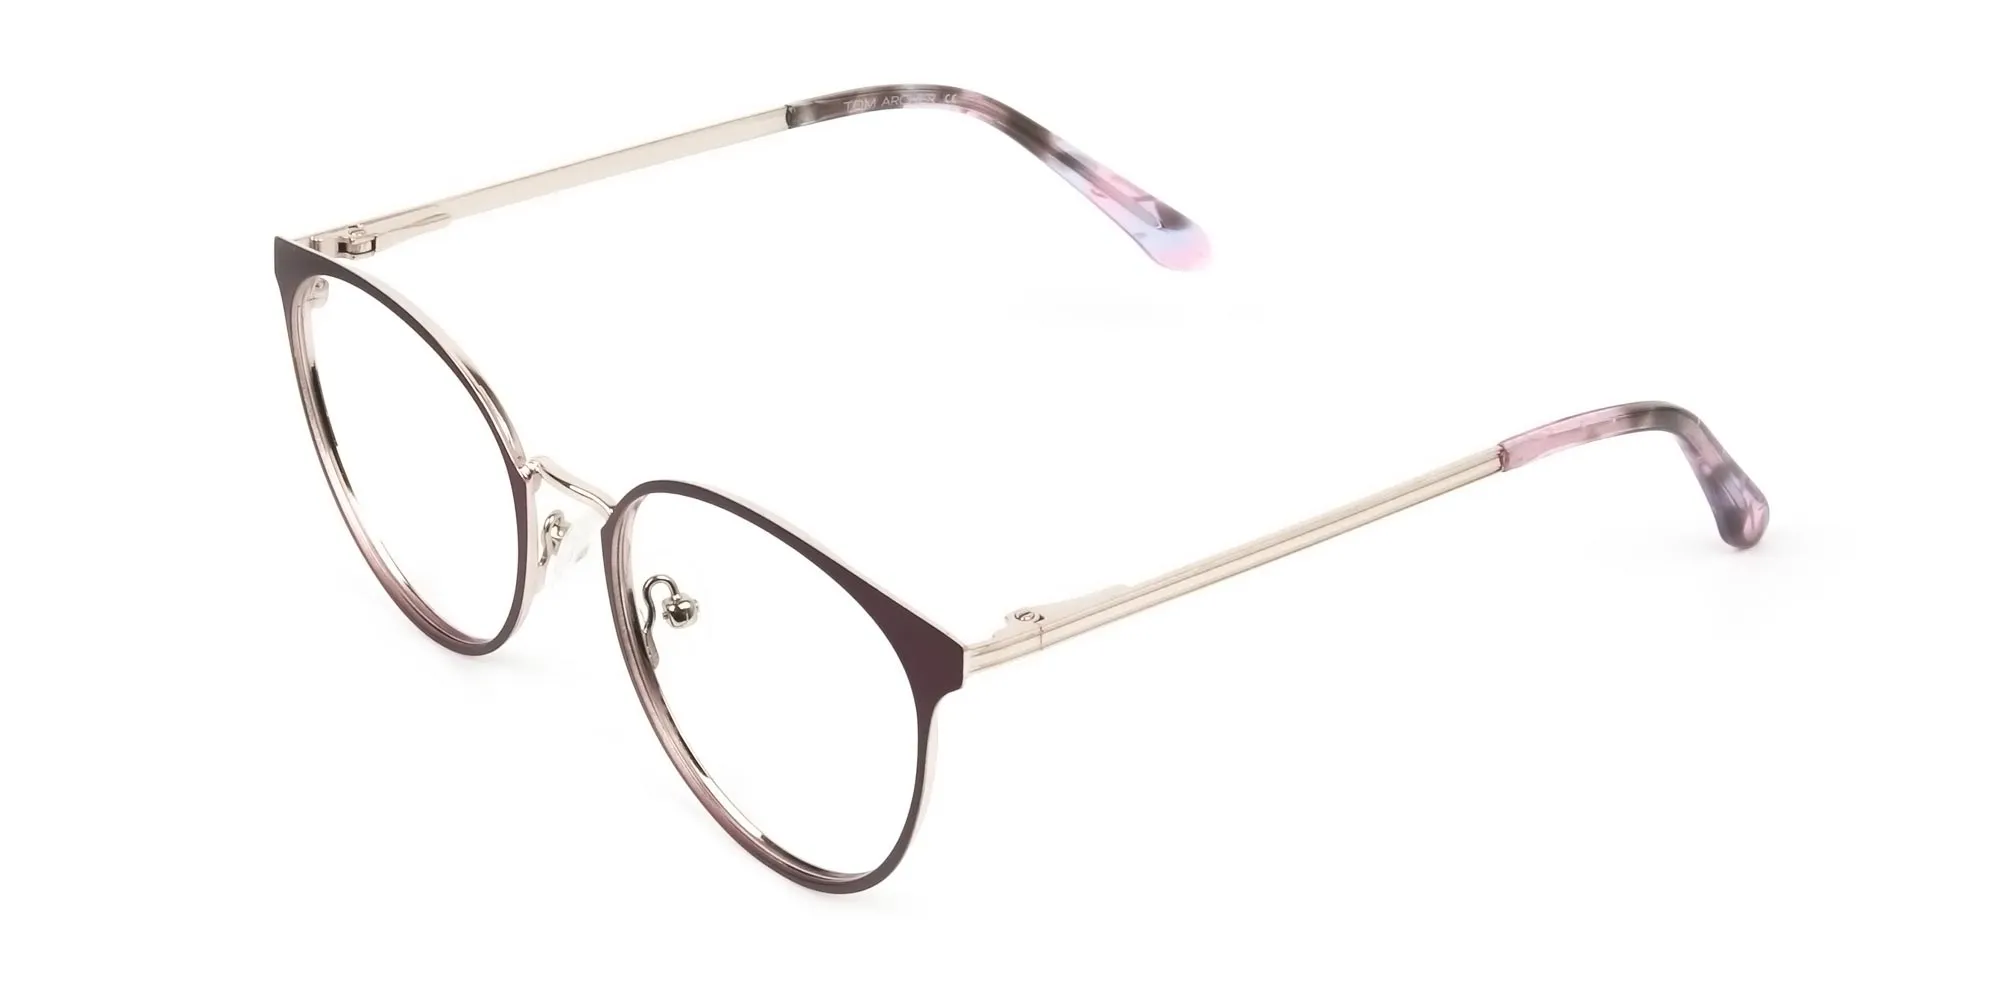 Silver Burgundy Red Spectacle Frames in Round  